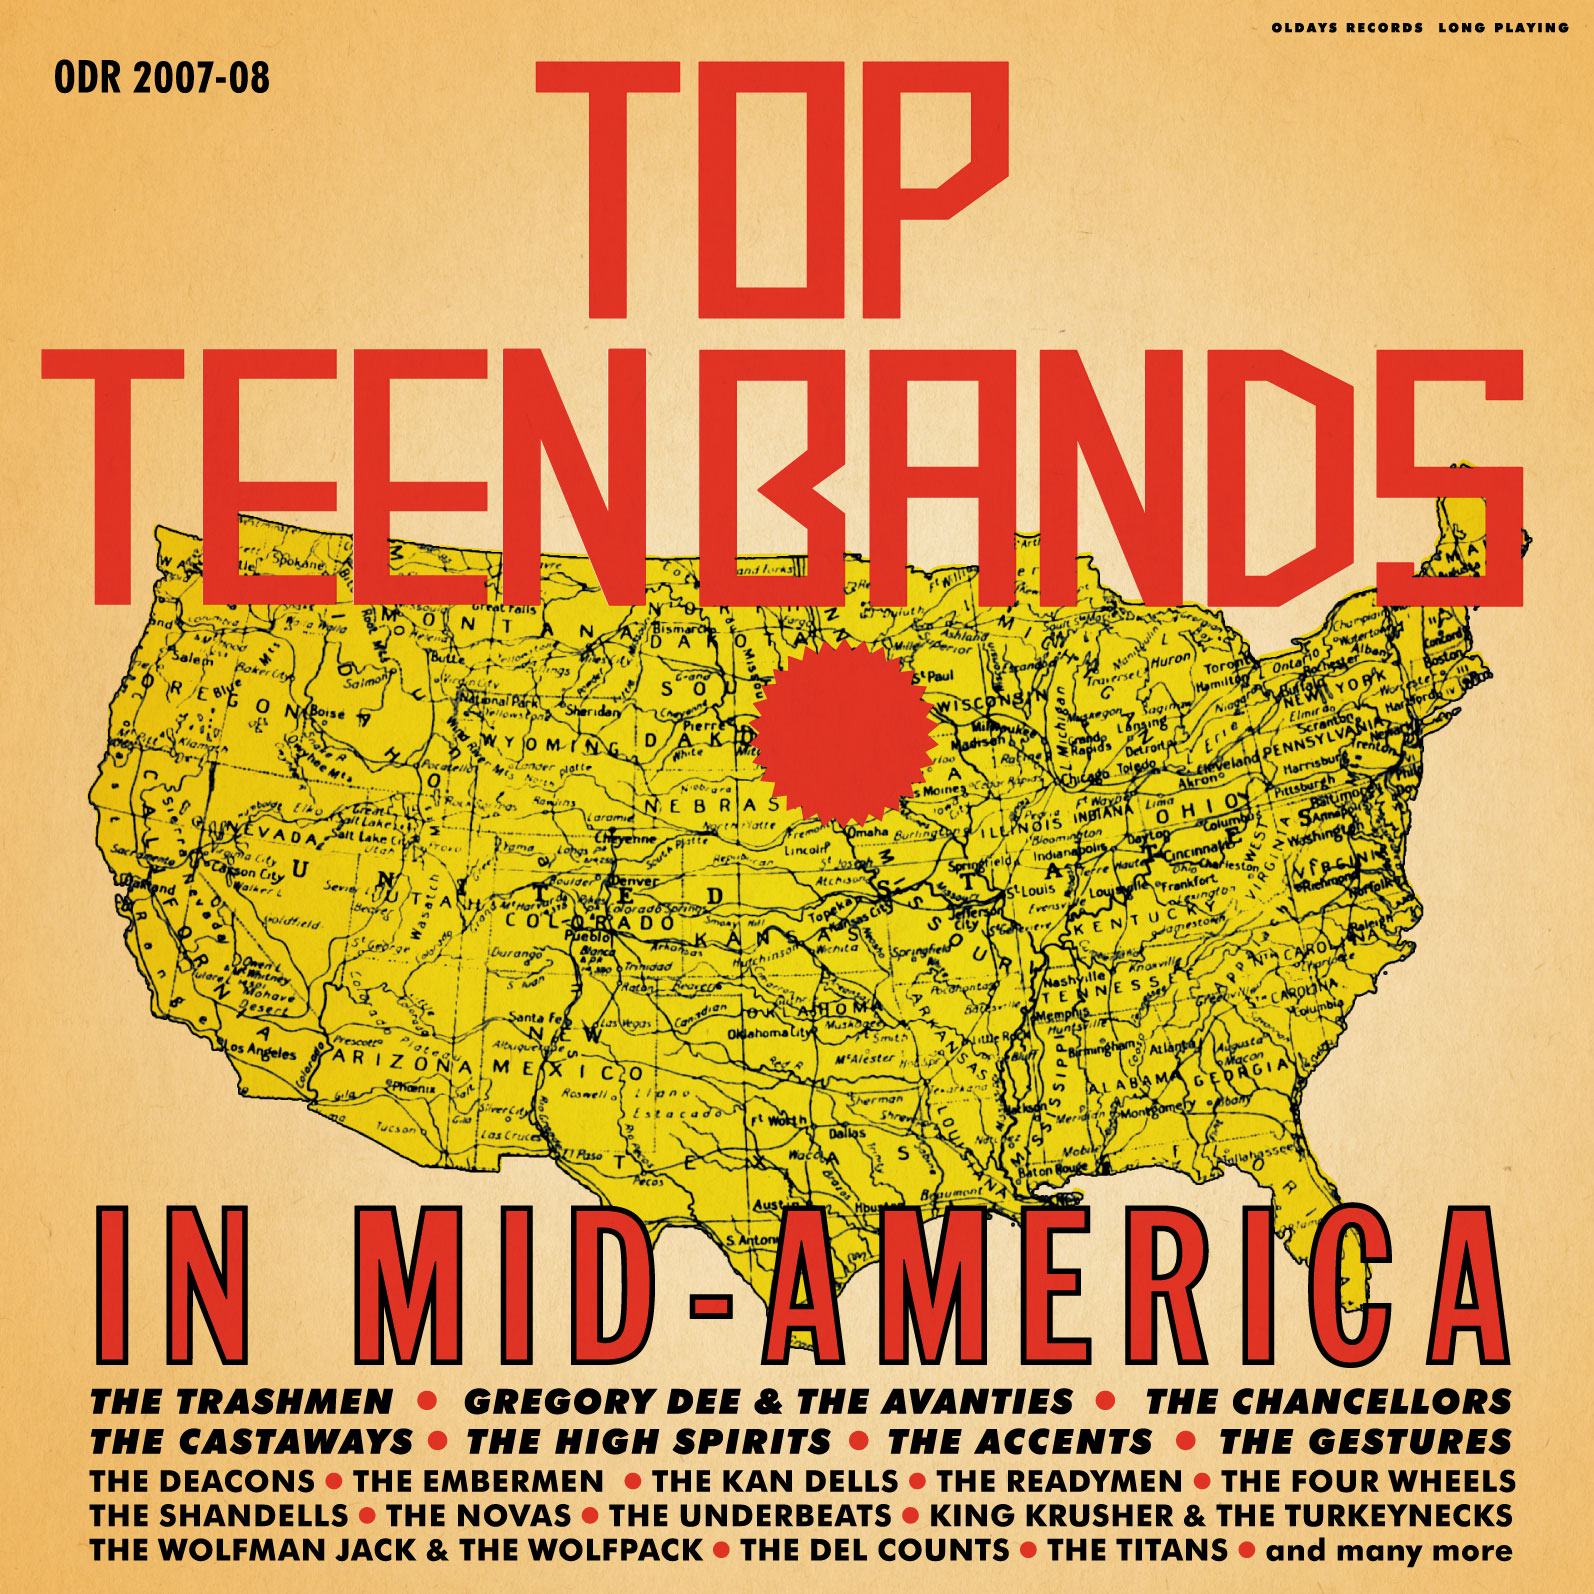 V.A. (GARAGE) / TOP TEEN BANDS IN MID-AMERICA / トップ・ティーン・バンズ・イン・ミッド・アメリカ(2枚組)